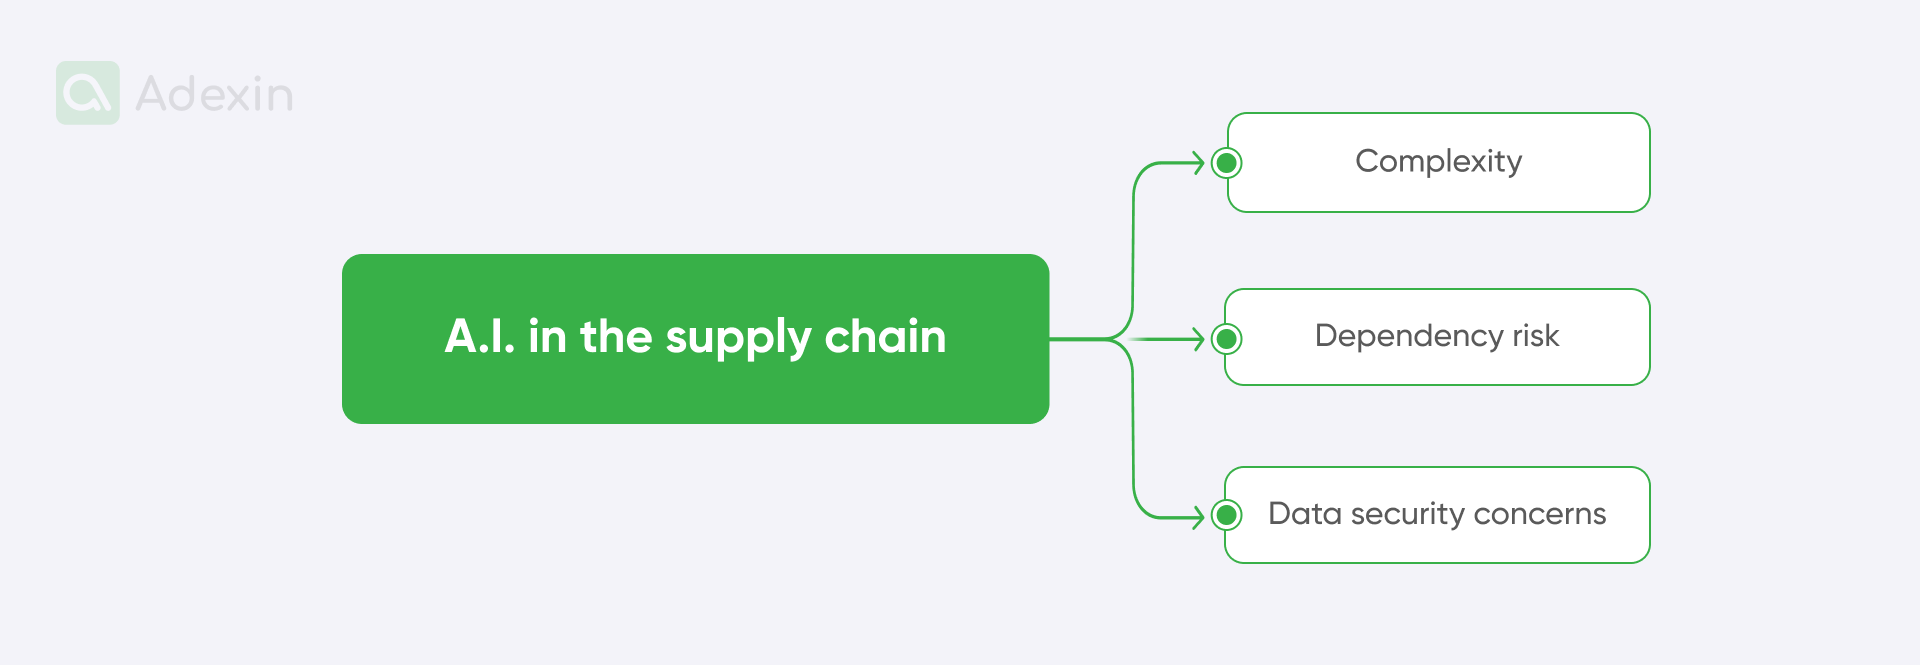 Potential AI challenges in the supply chain